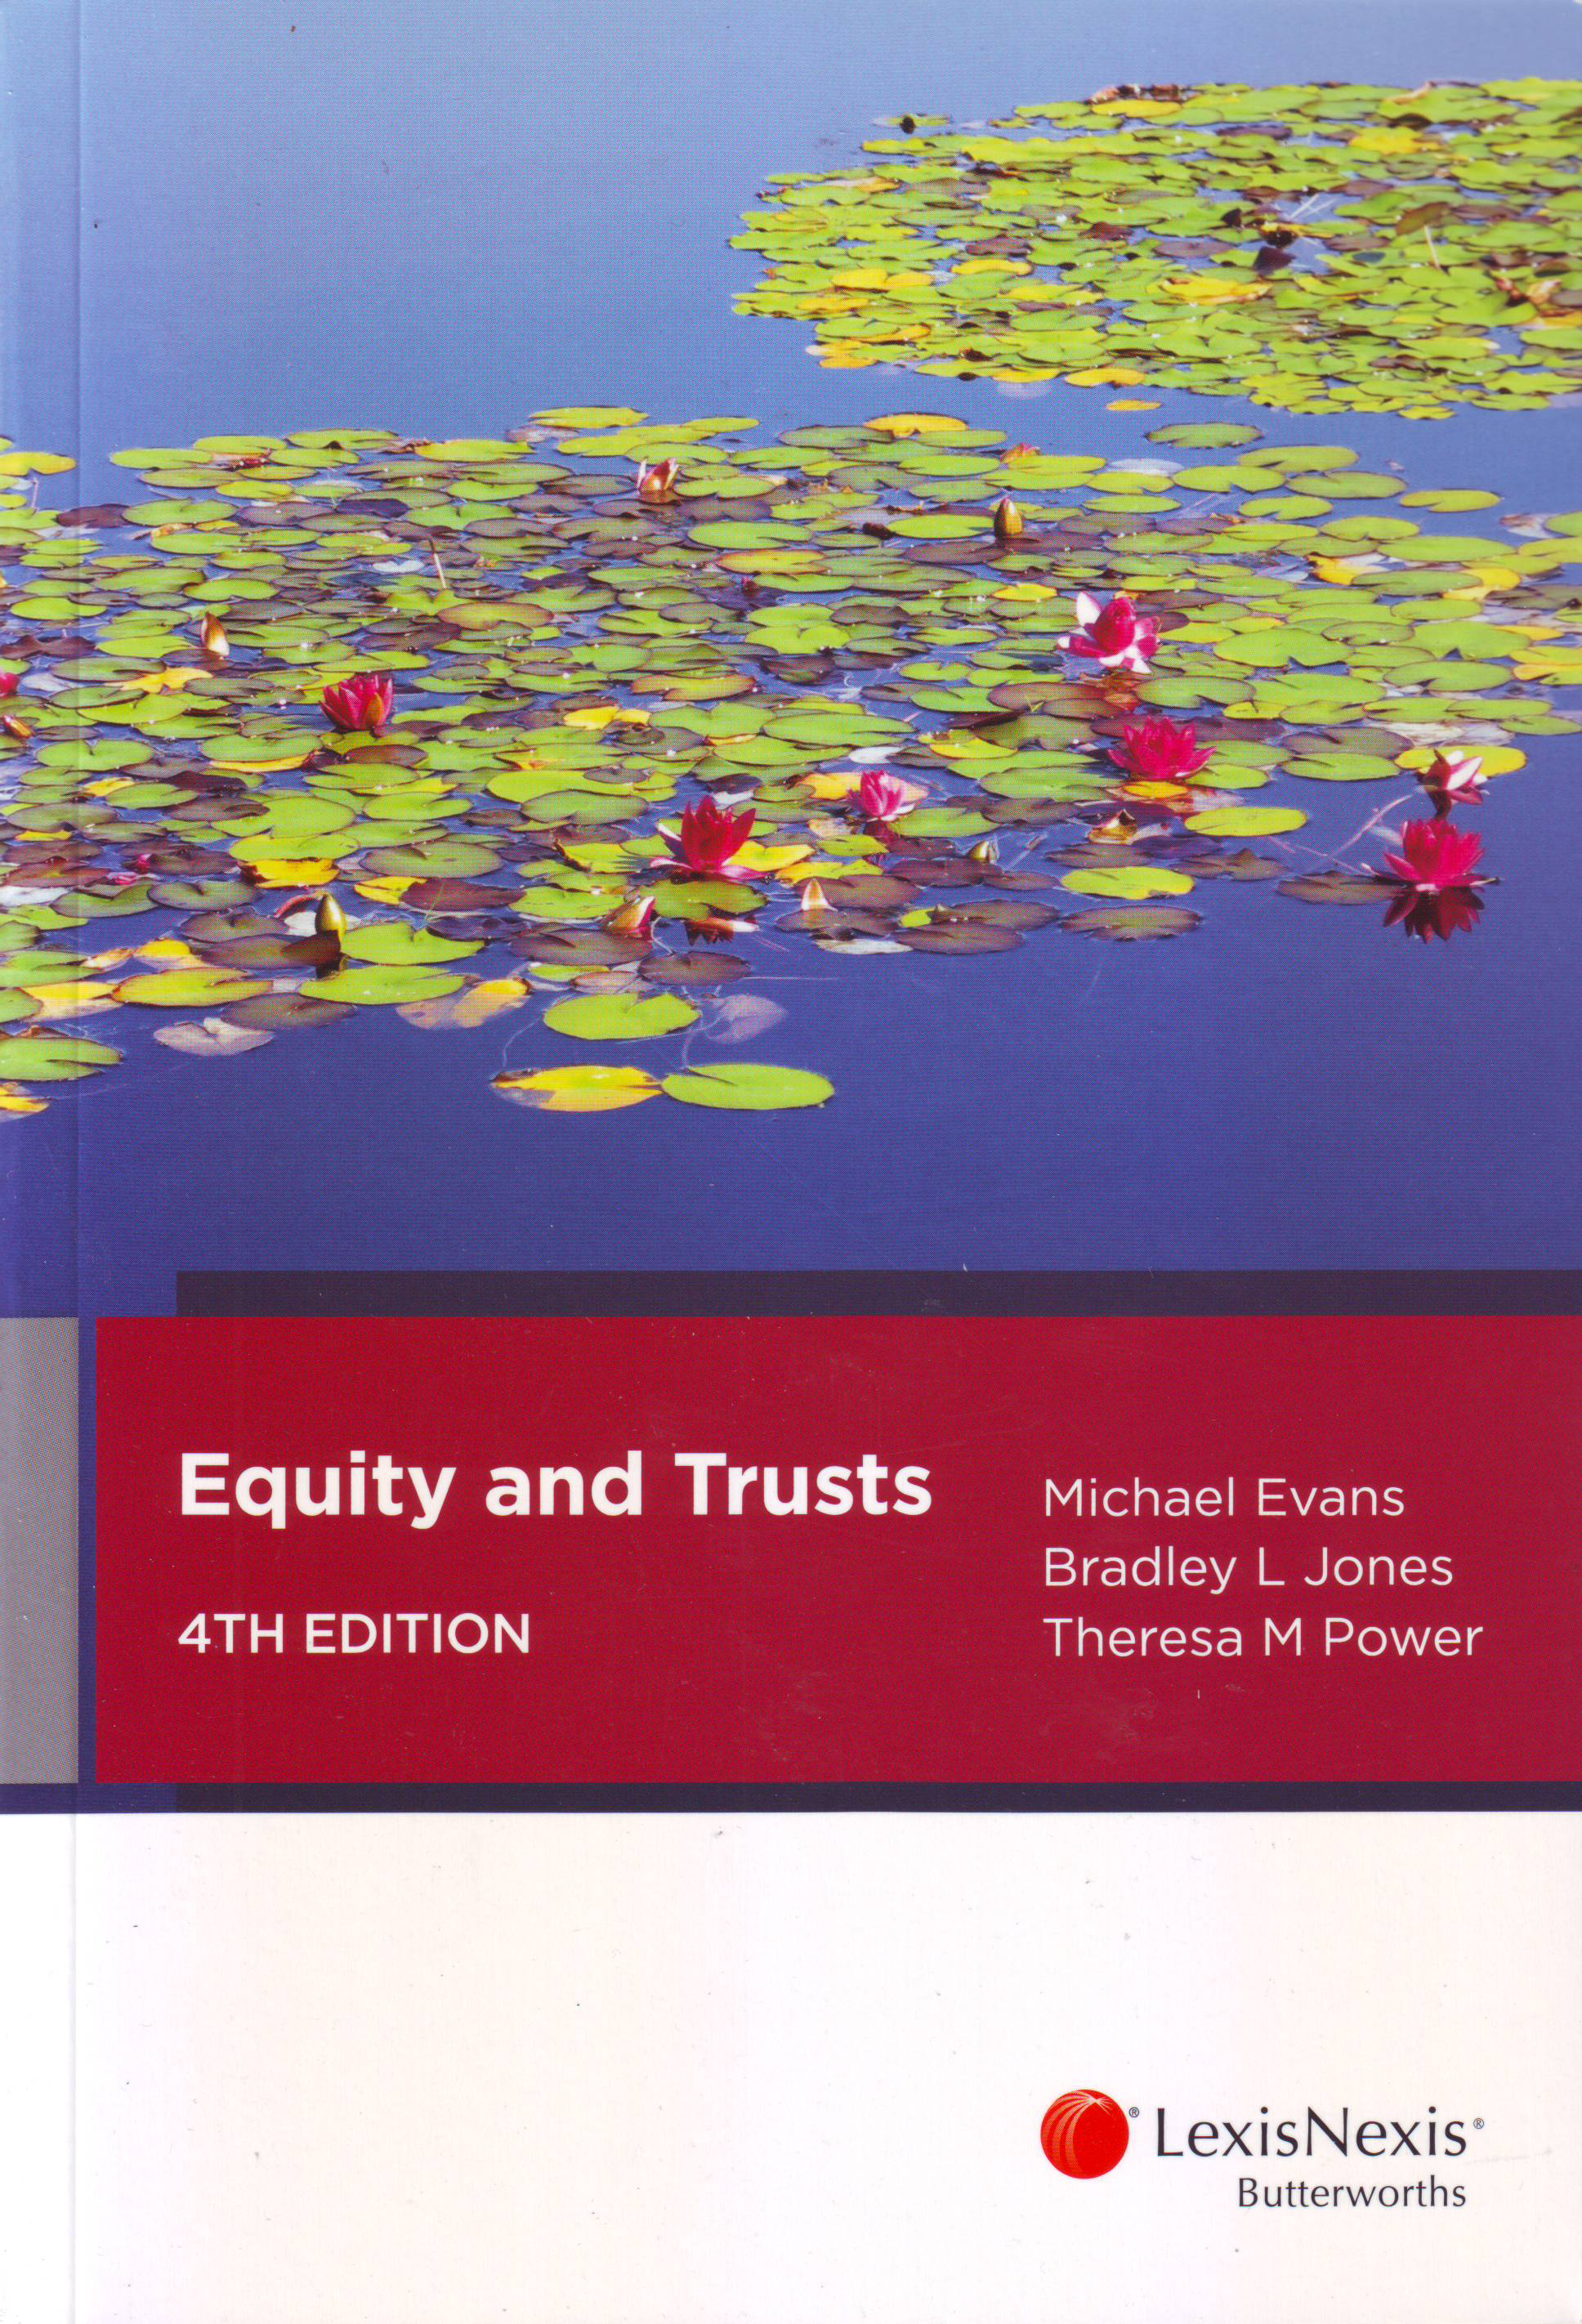 Equity and Trusts e4